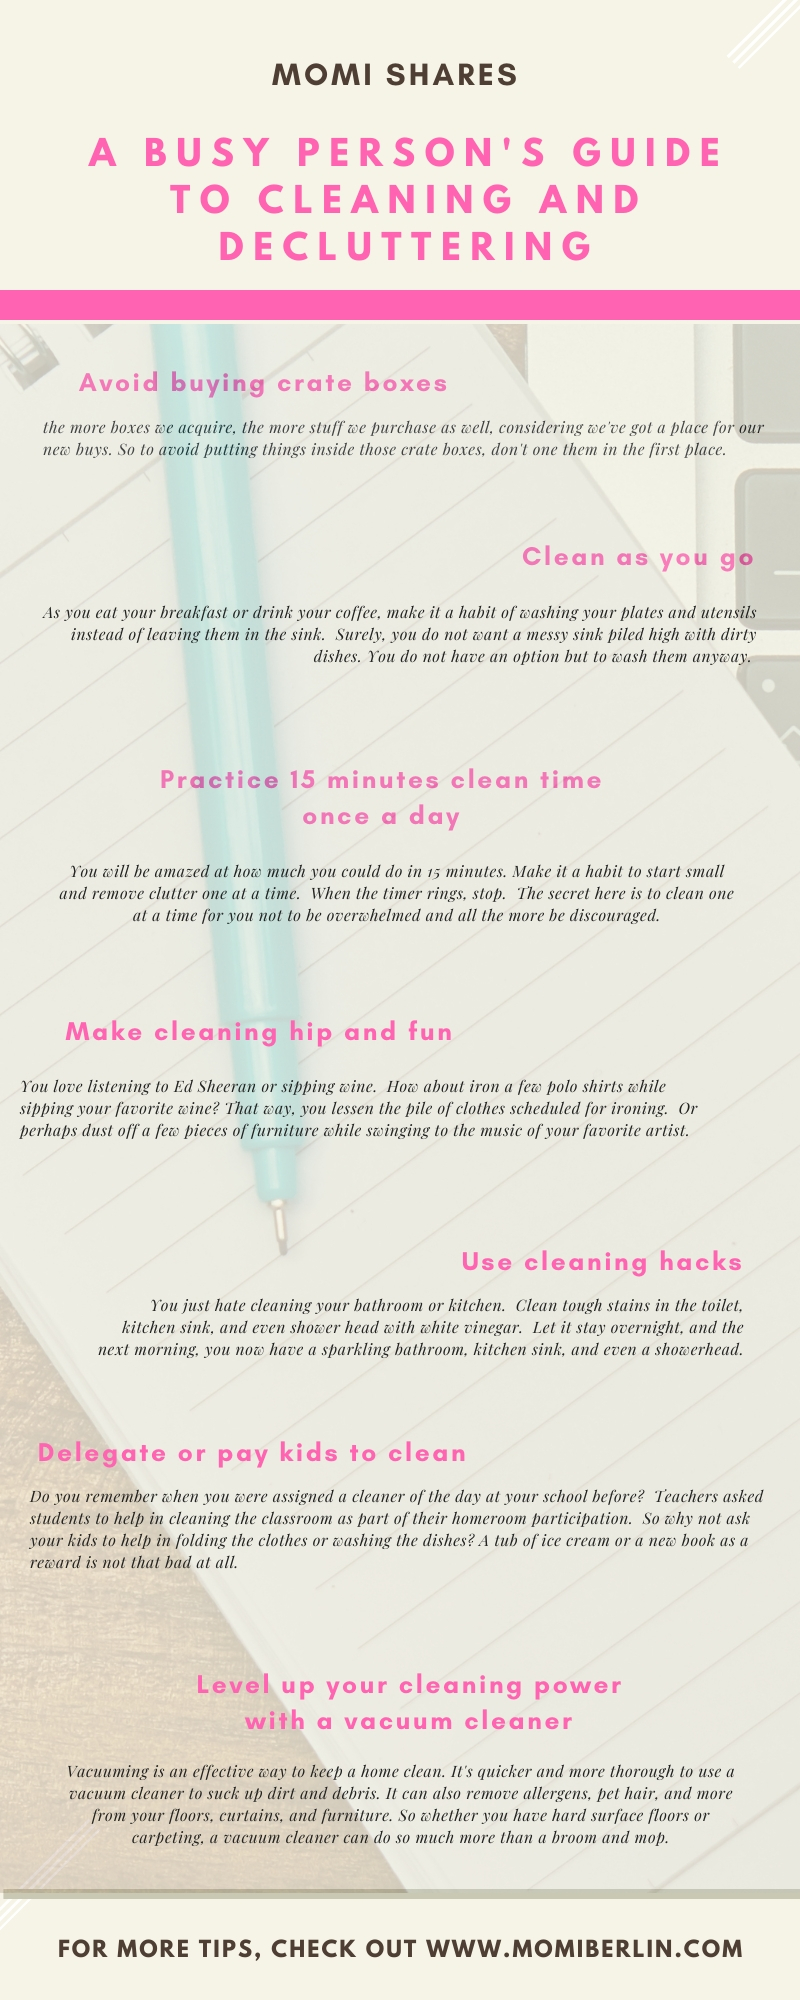 A Busy Person's Guide to Cleaning and Decluttering